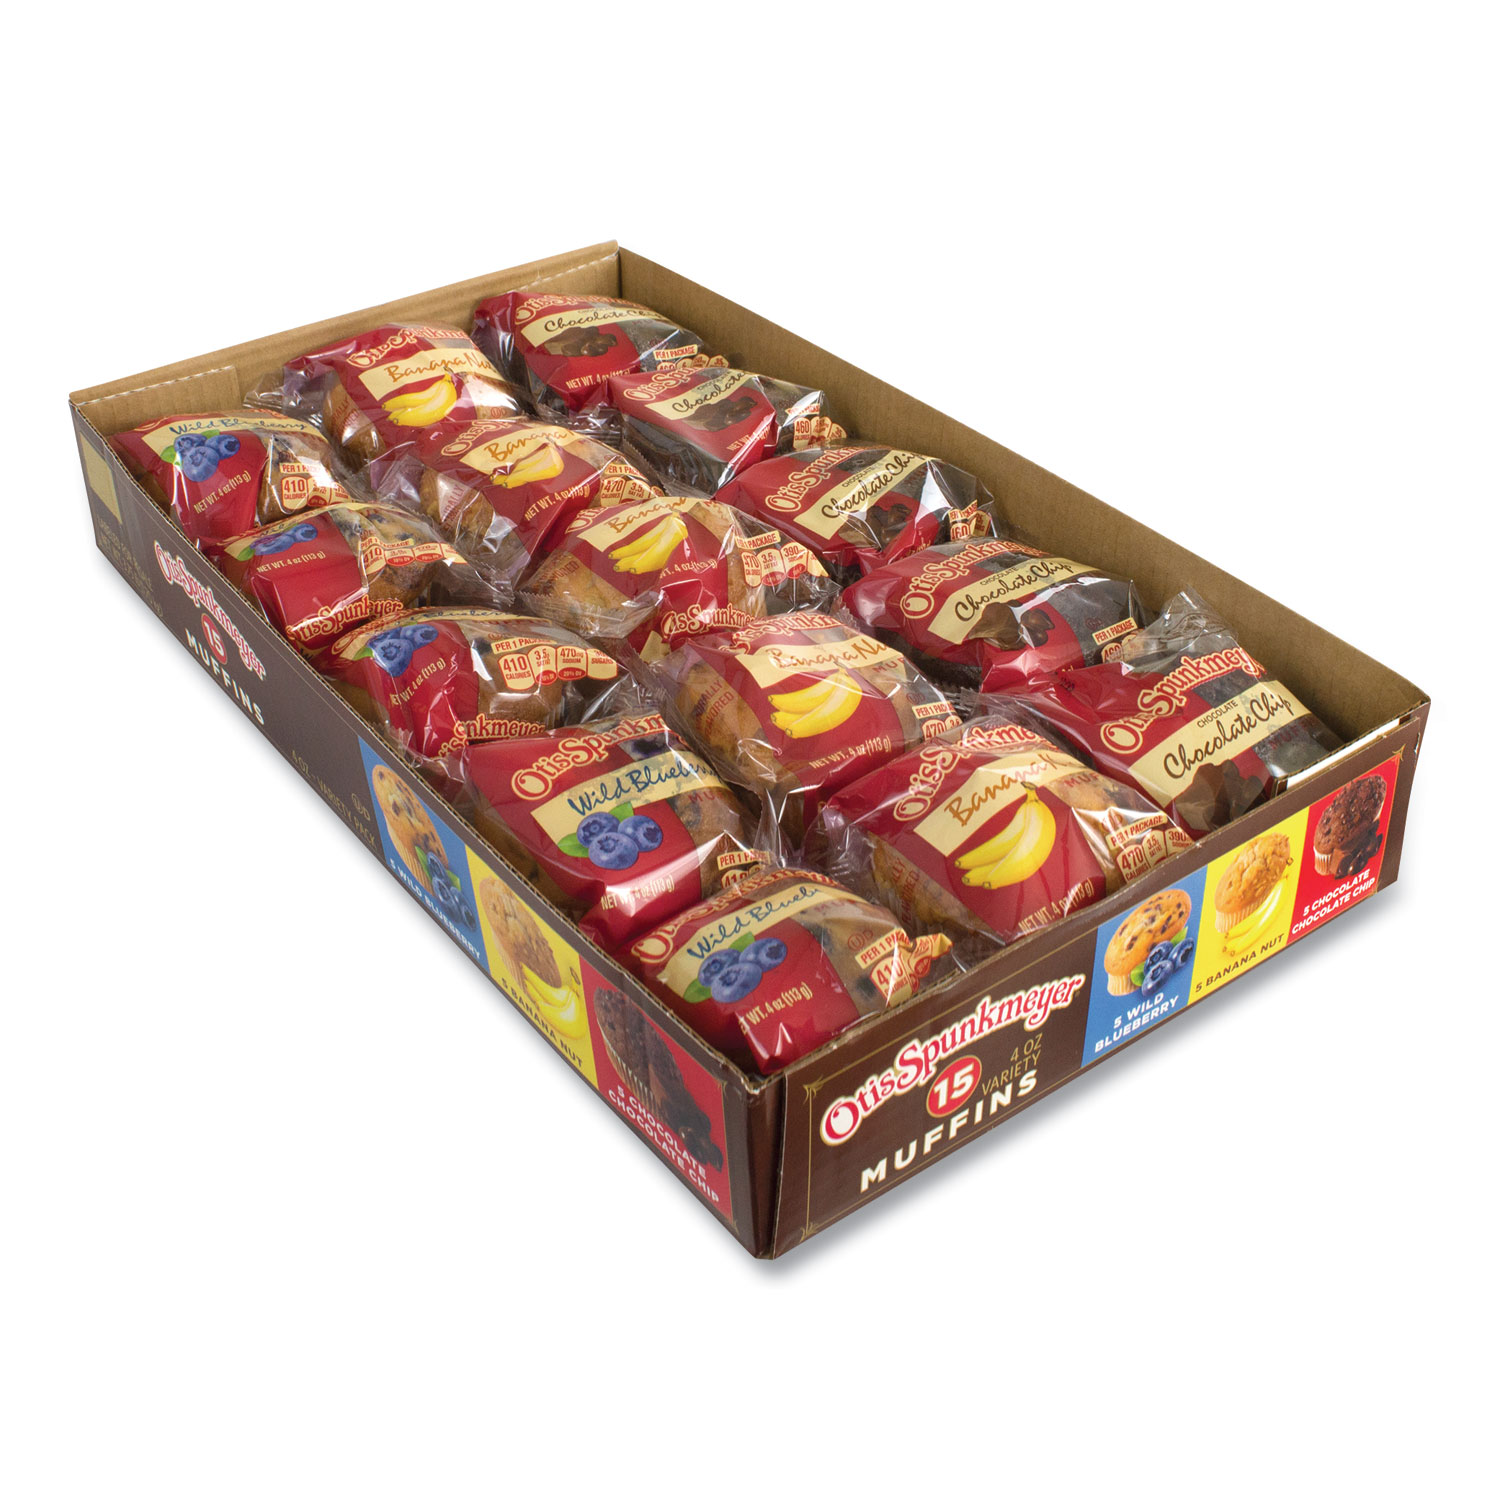  Otis Spunkmeyer 737470 Muffins Variety Pack, Assorted Flavors, 4 oz Pack, 15 Packs/Box, Free Delivery in 1-4 Business Days (GRR90000067) 